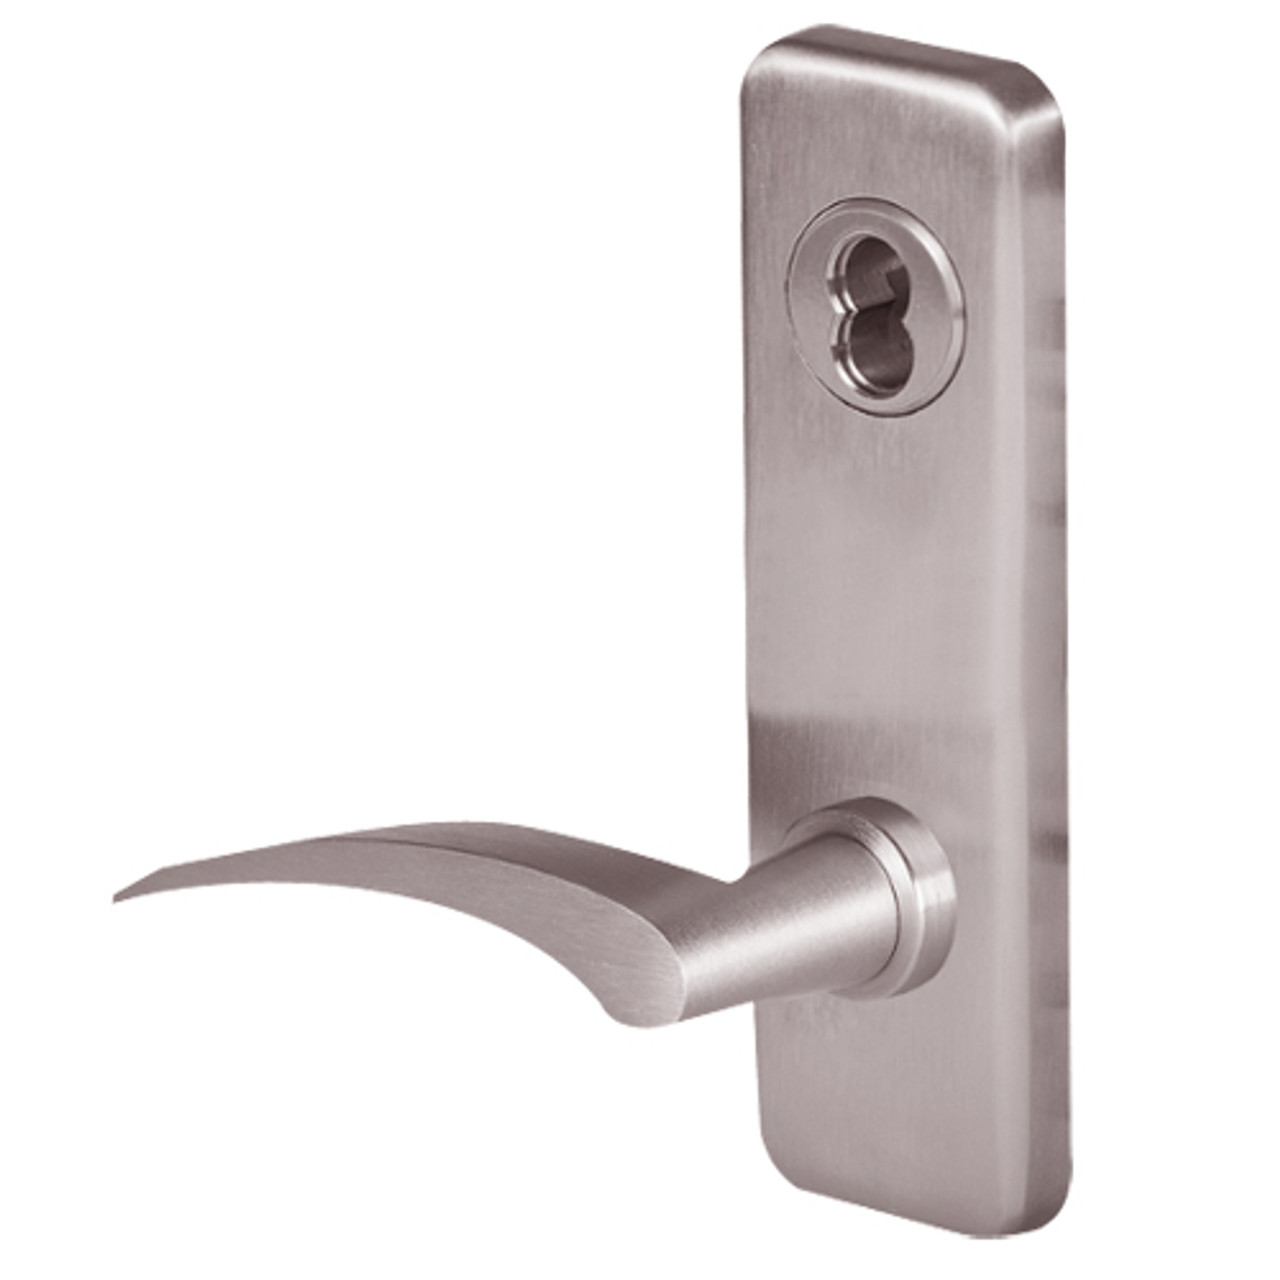 45H0LT17LJ630 Best 40H Series Privacy Heavy Duty Mortise Lever Lock with Gull Wing LH in Satin Stainless Steel